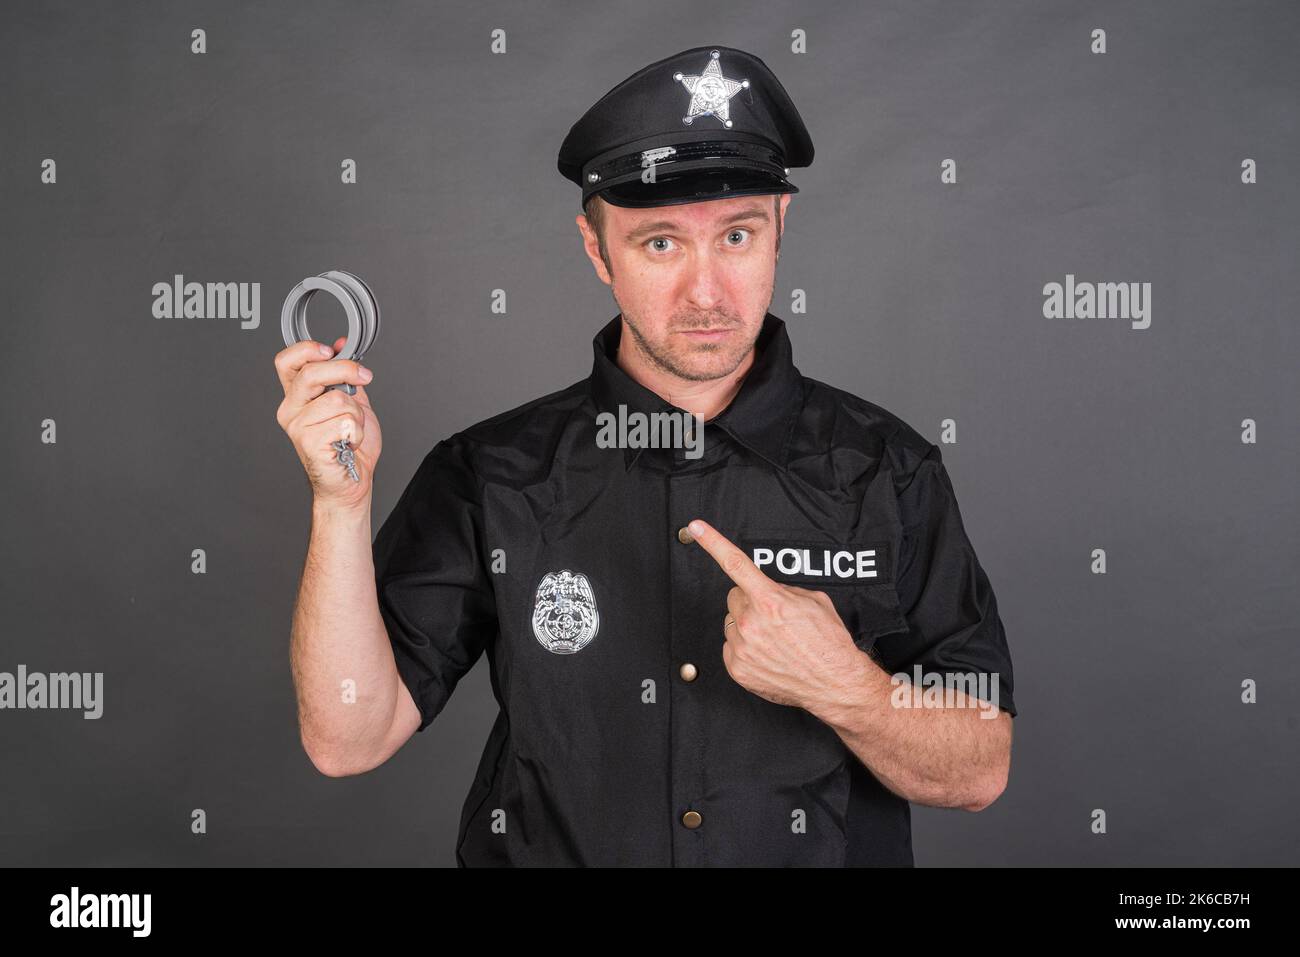 Portrait of Caucasian man wearing police uniform costume and holding handcuffs Stock Photo